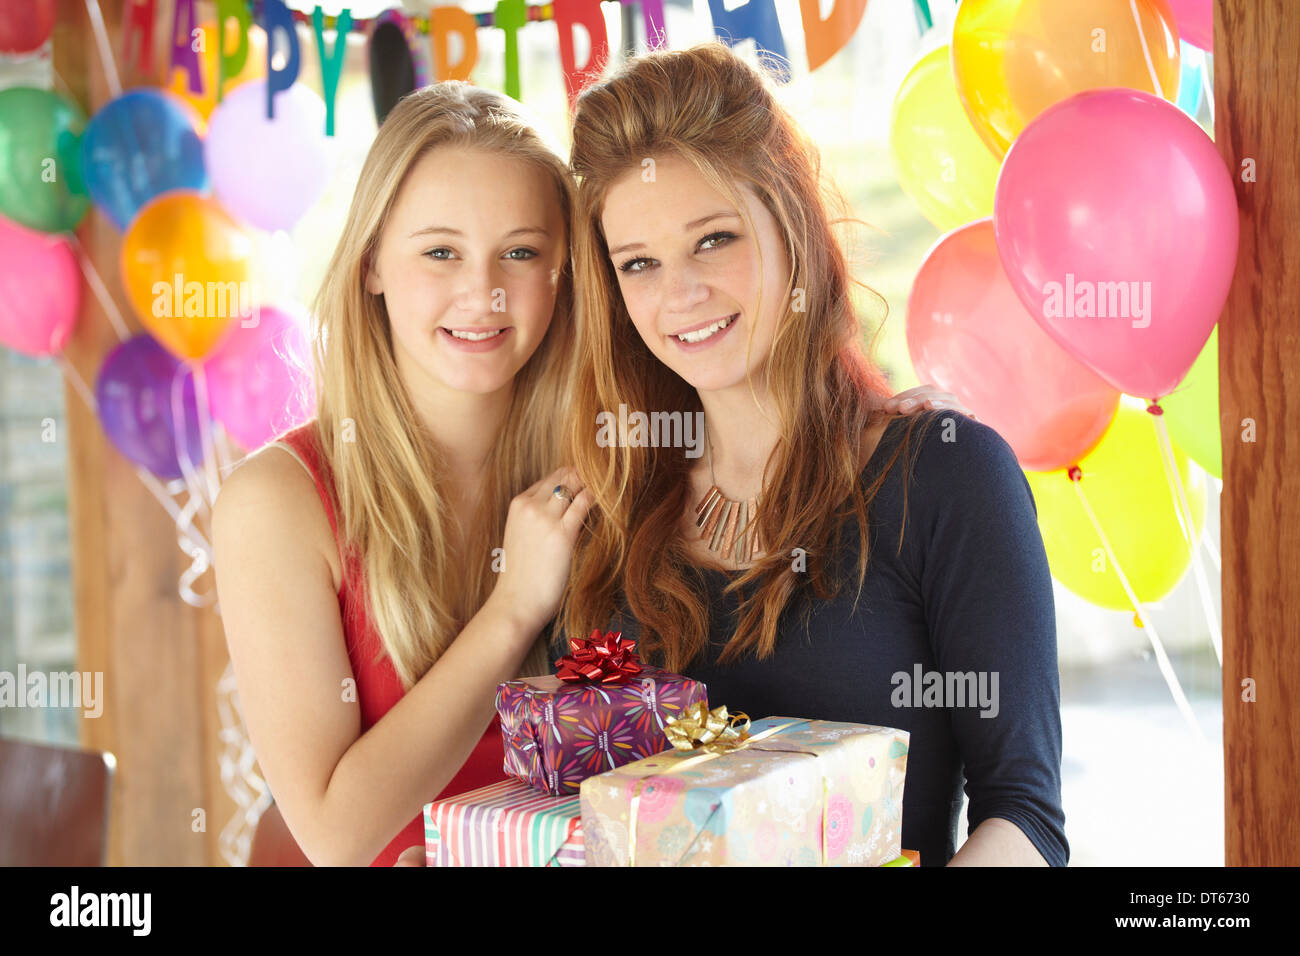 Two teenage girls sharing gifts at birthday party Stock Photo - Alamy